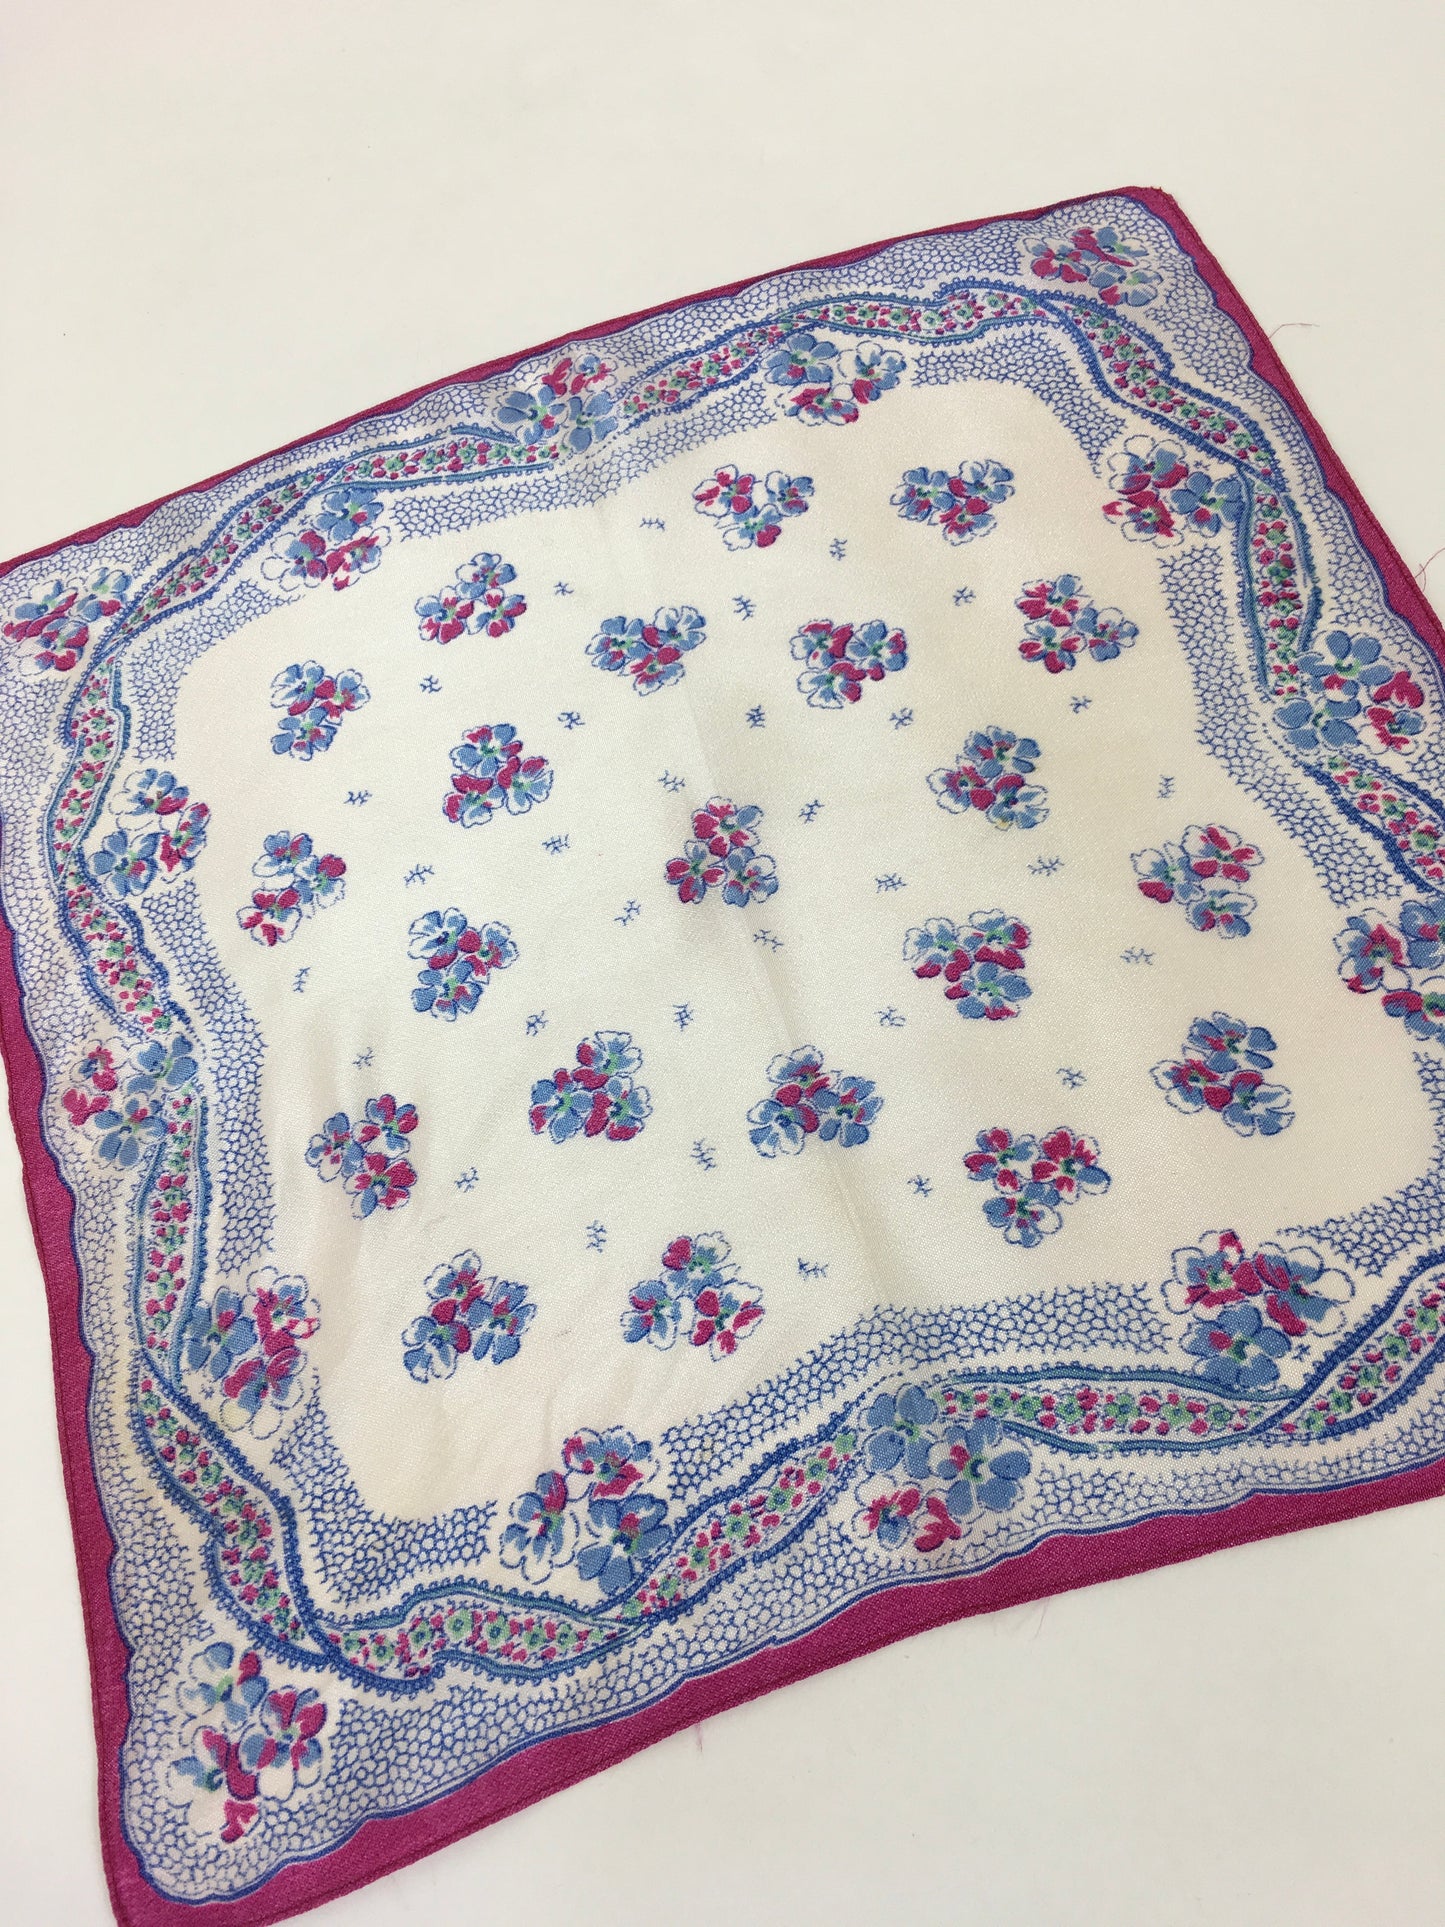 Original 1940’s Rayon Hankie - In Cerise Pink, Ivory and Blue